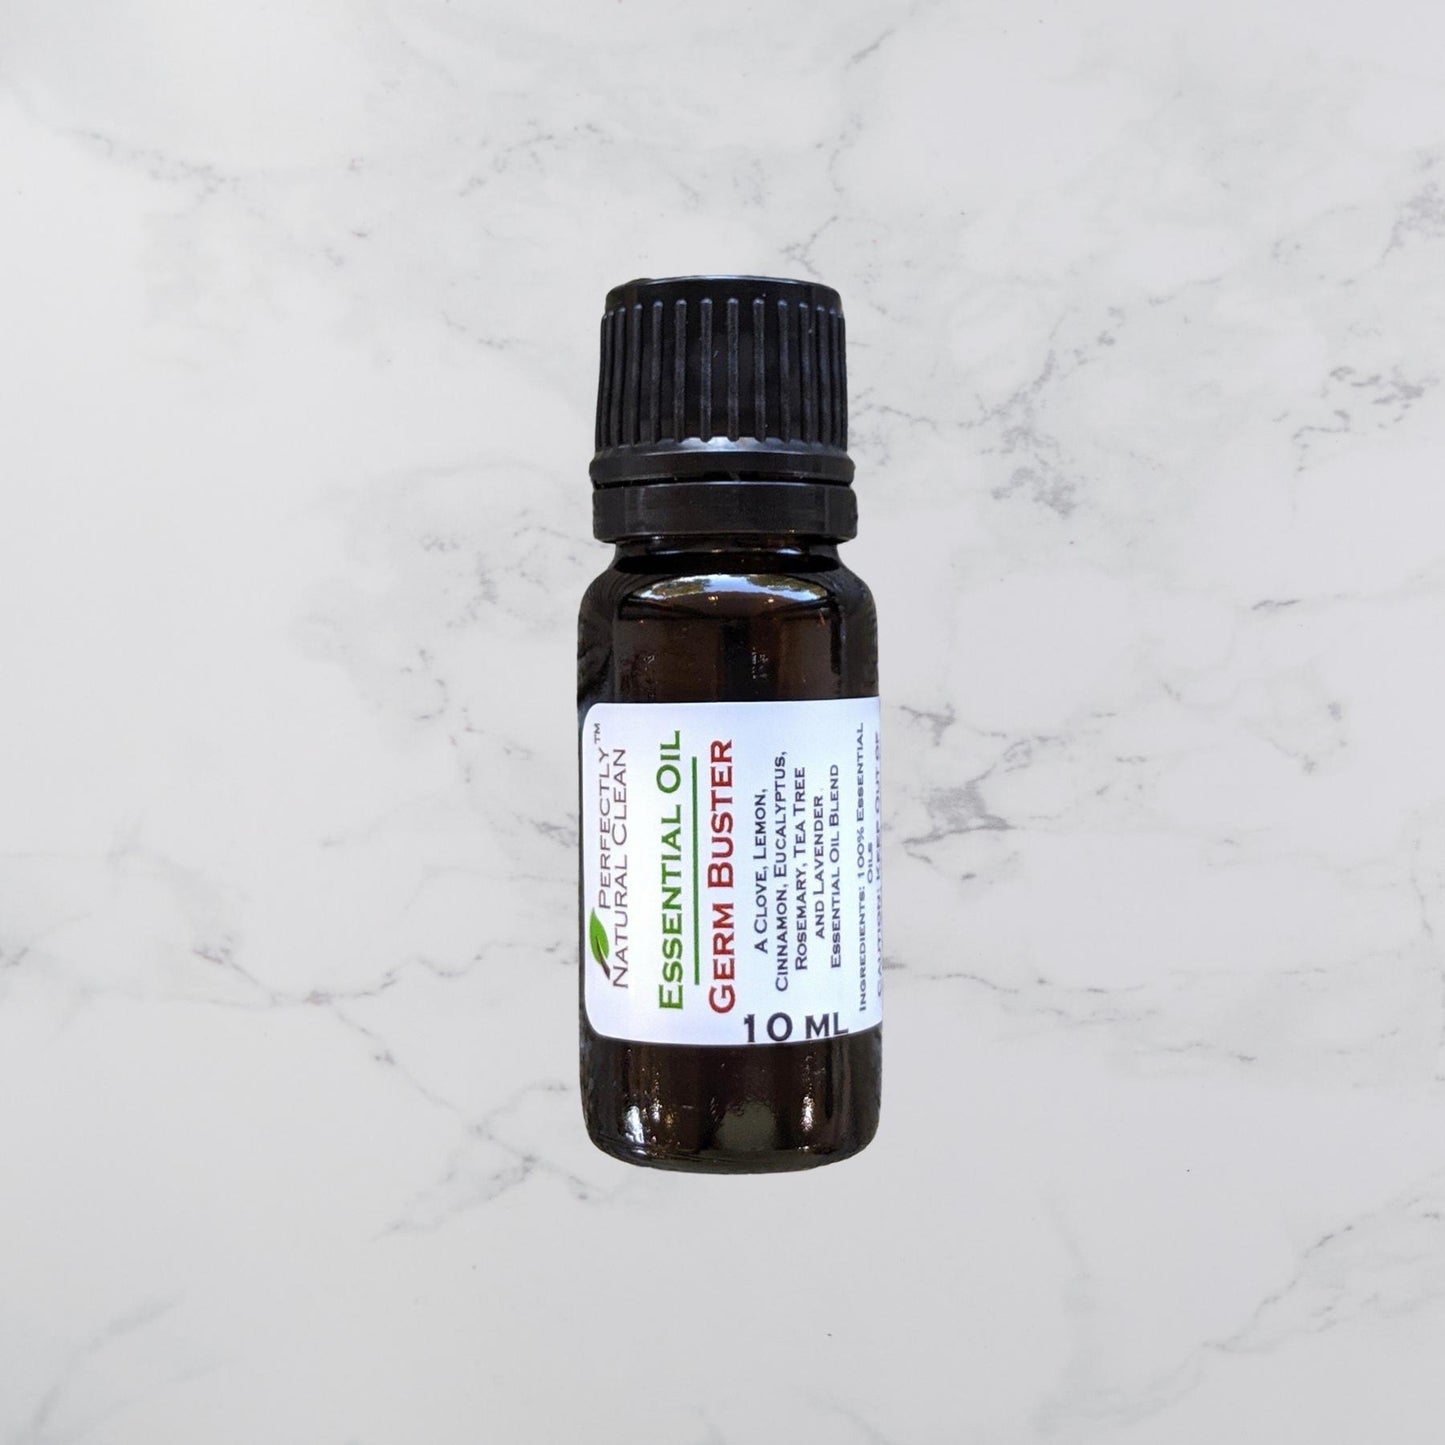 Germ Buster Synergy Essential Oil Blend, 10ml-Essential Oils-Perfectly Natural Soap